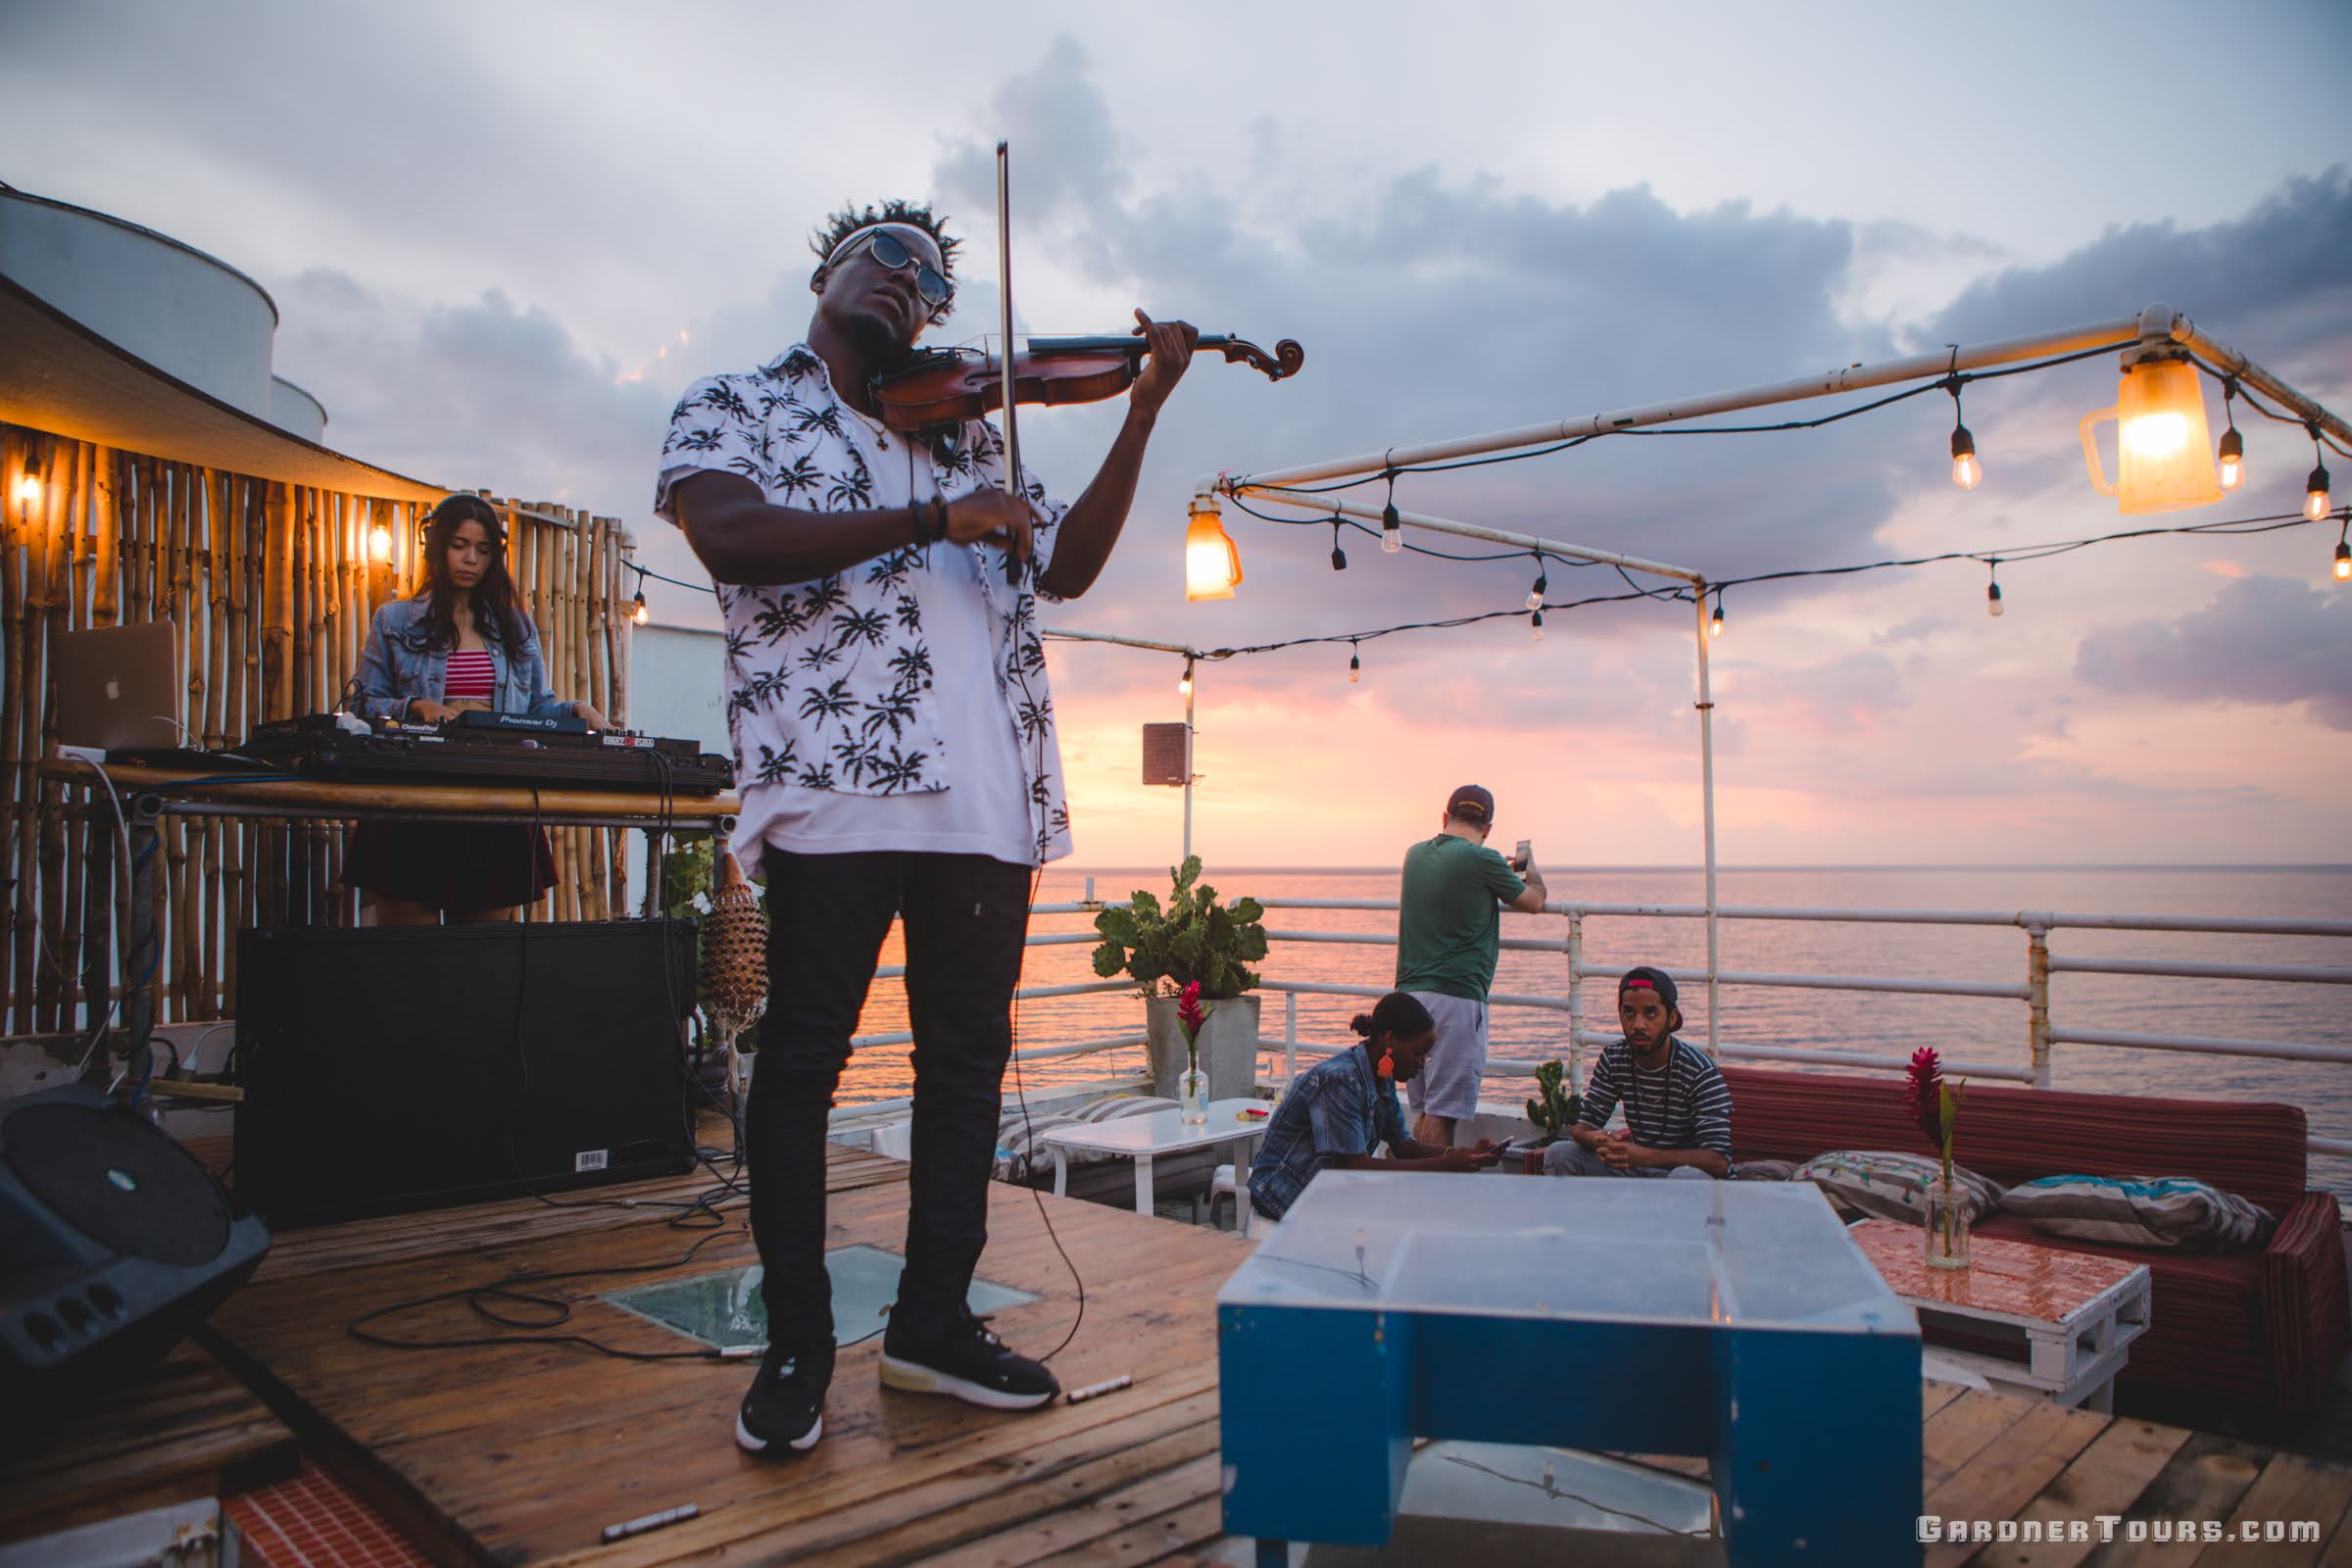 Man playing Violin and woman playing piano during Live Jazz Night at Malecon 663 during Sunset in Havana Cuba